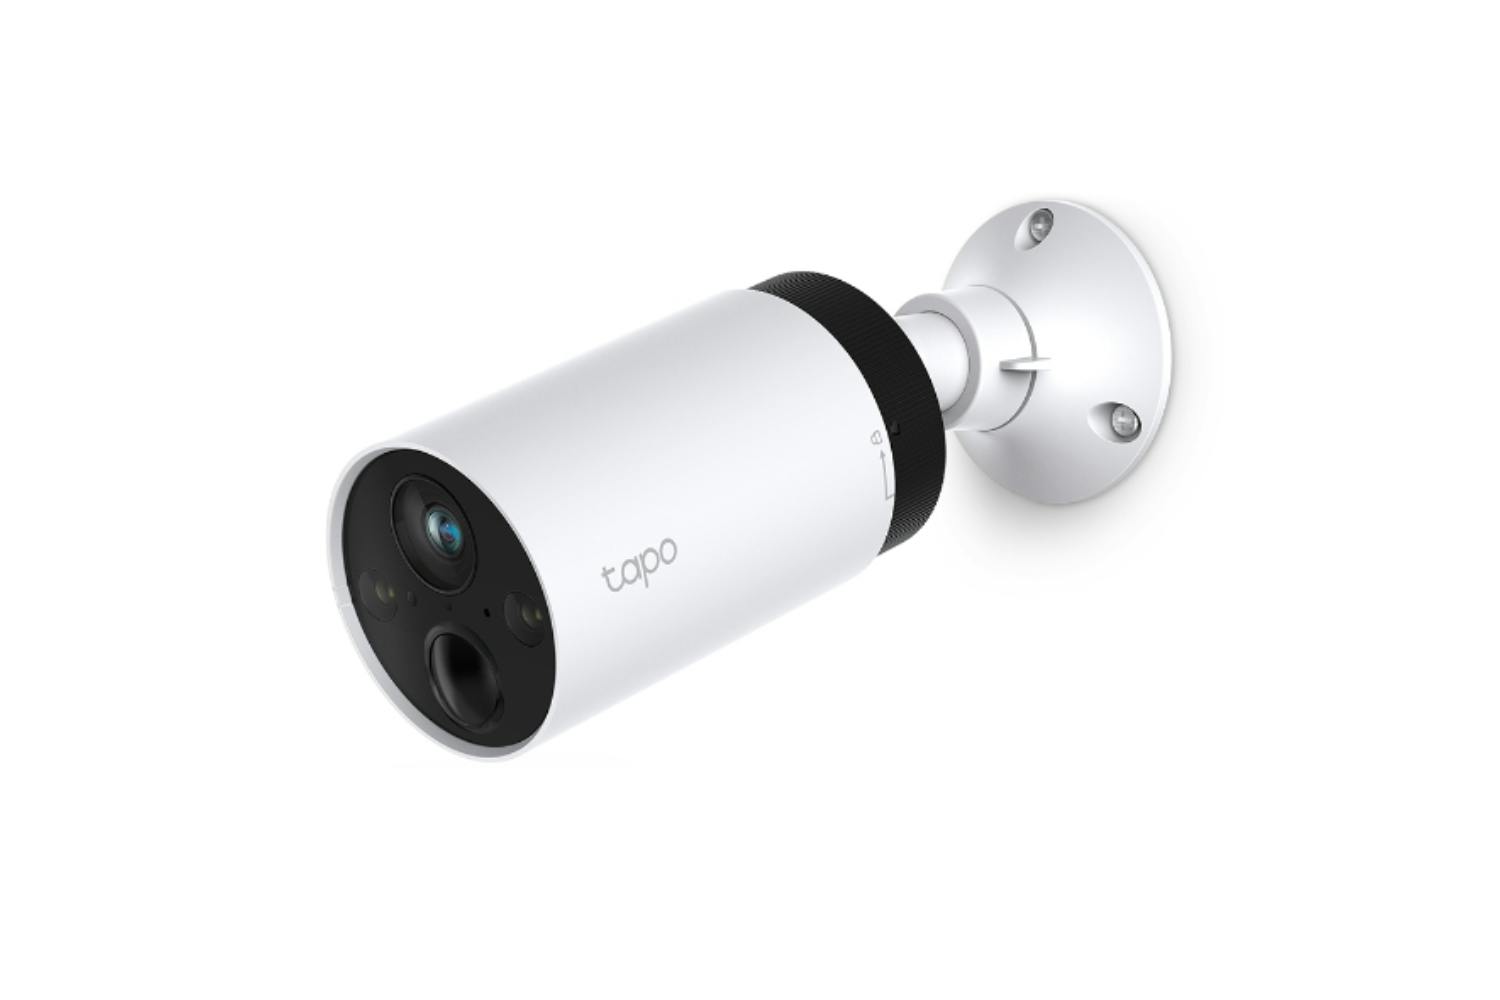 TP-Link Tapo Smart Wire-Free Security Camera